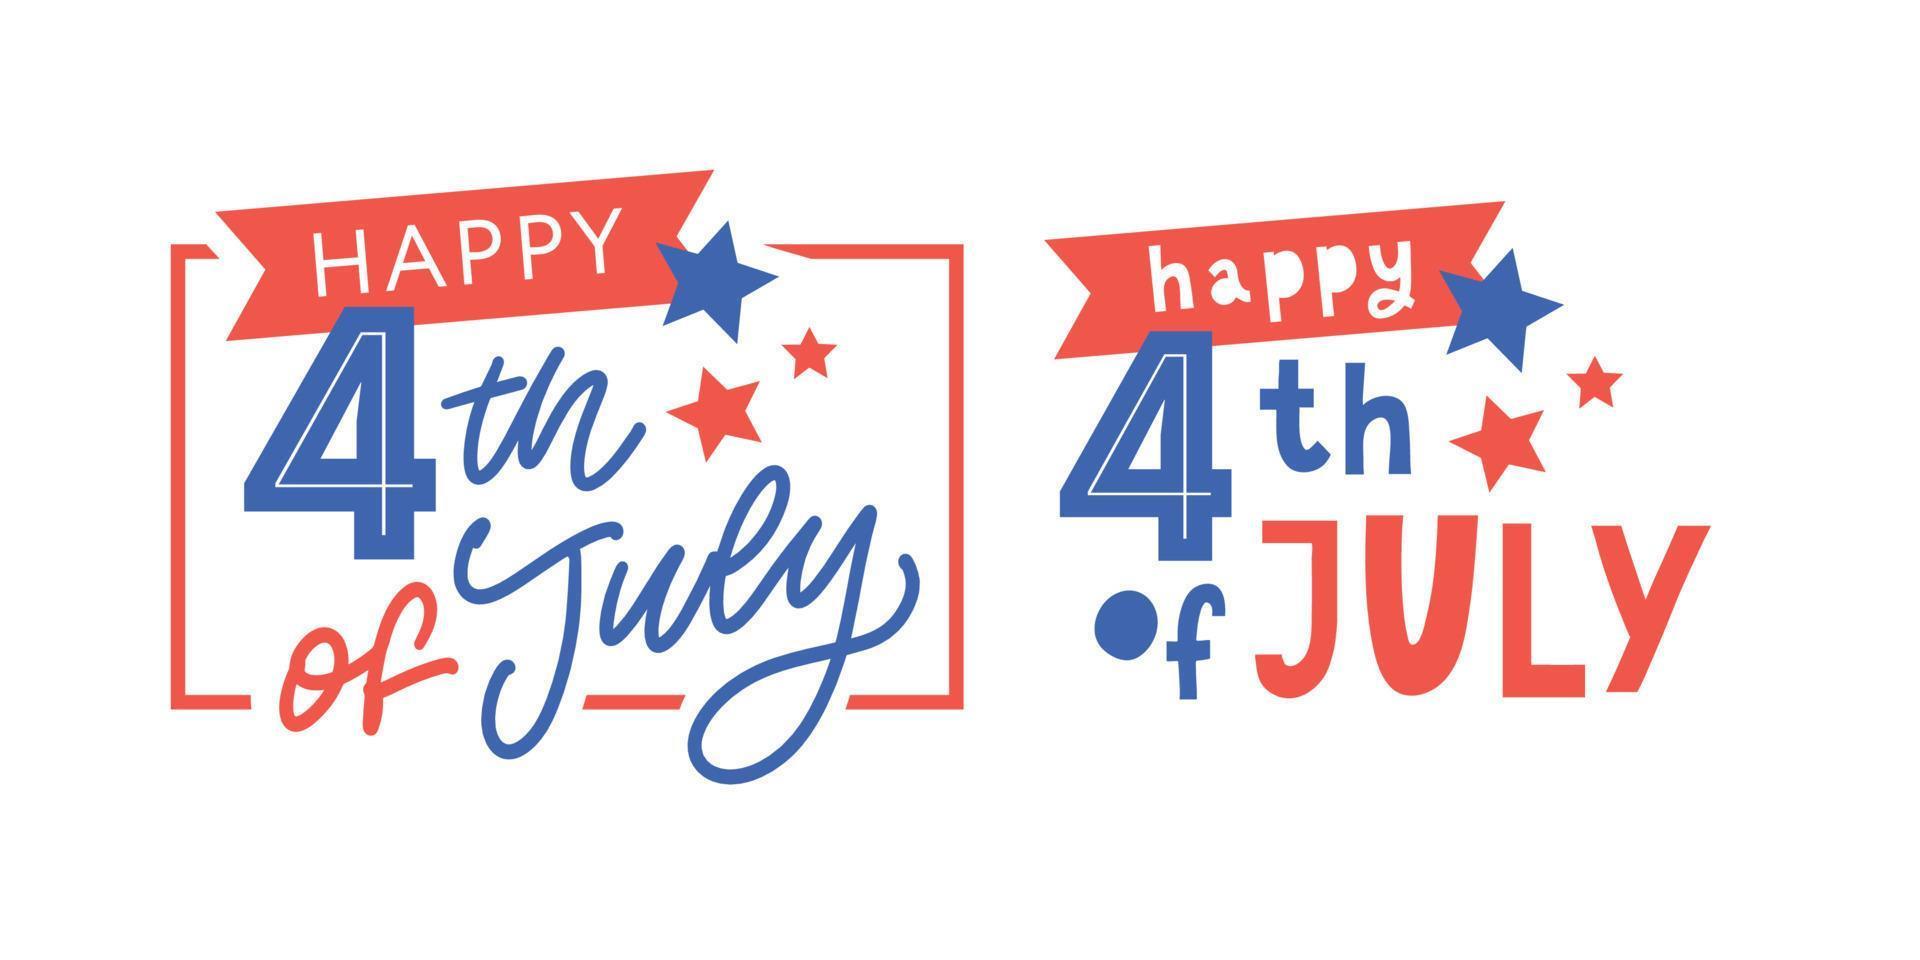 Fourth 4 of July stylish american independence day design Fourth of July vector